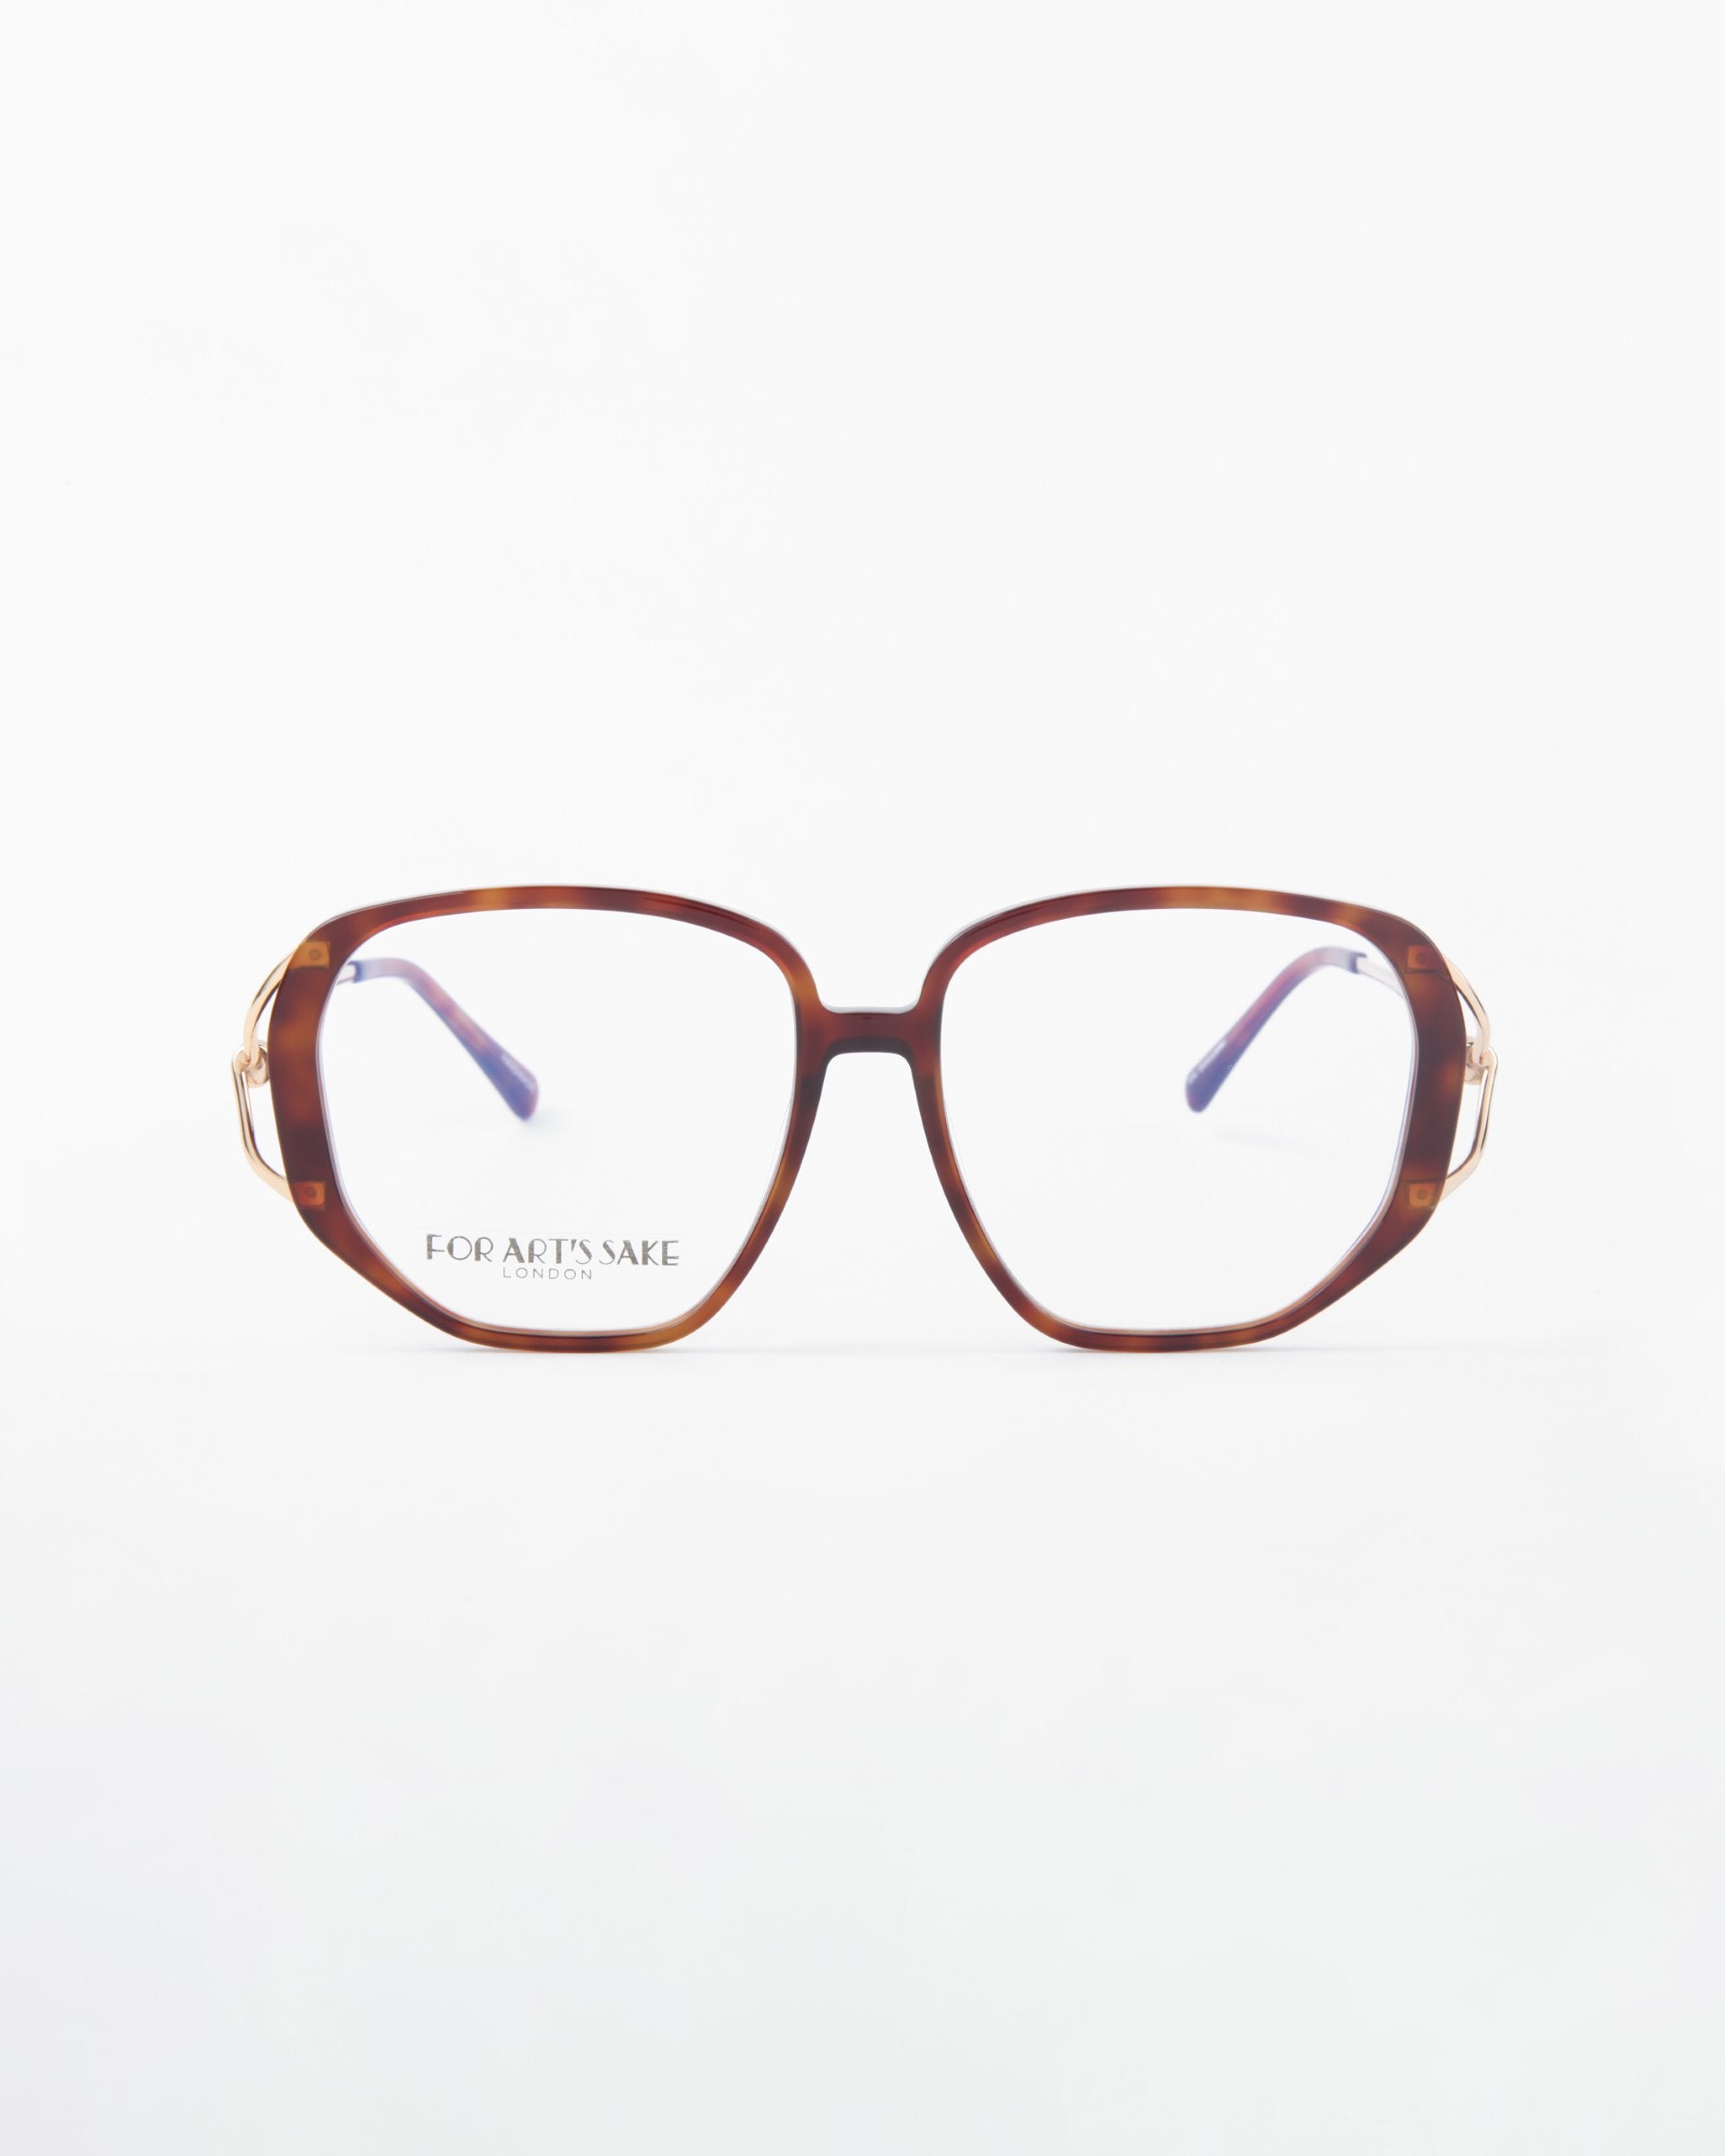 A pair of eyeglasses with large, square tortoiseshell frames and clear lenses is centered on a plain white background. The temples have a slight curve, and the brand name "For Art's Sake®" is visible on the left lens. These stylish Remix frames also offer UV protection, ensuring your eyes stay safe in any light.